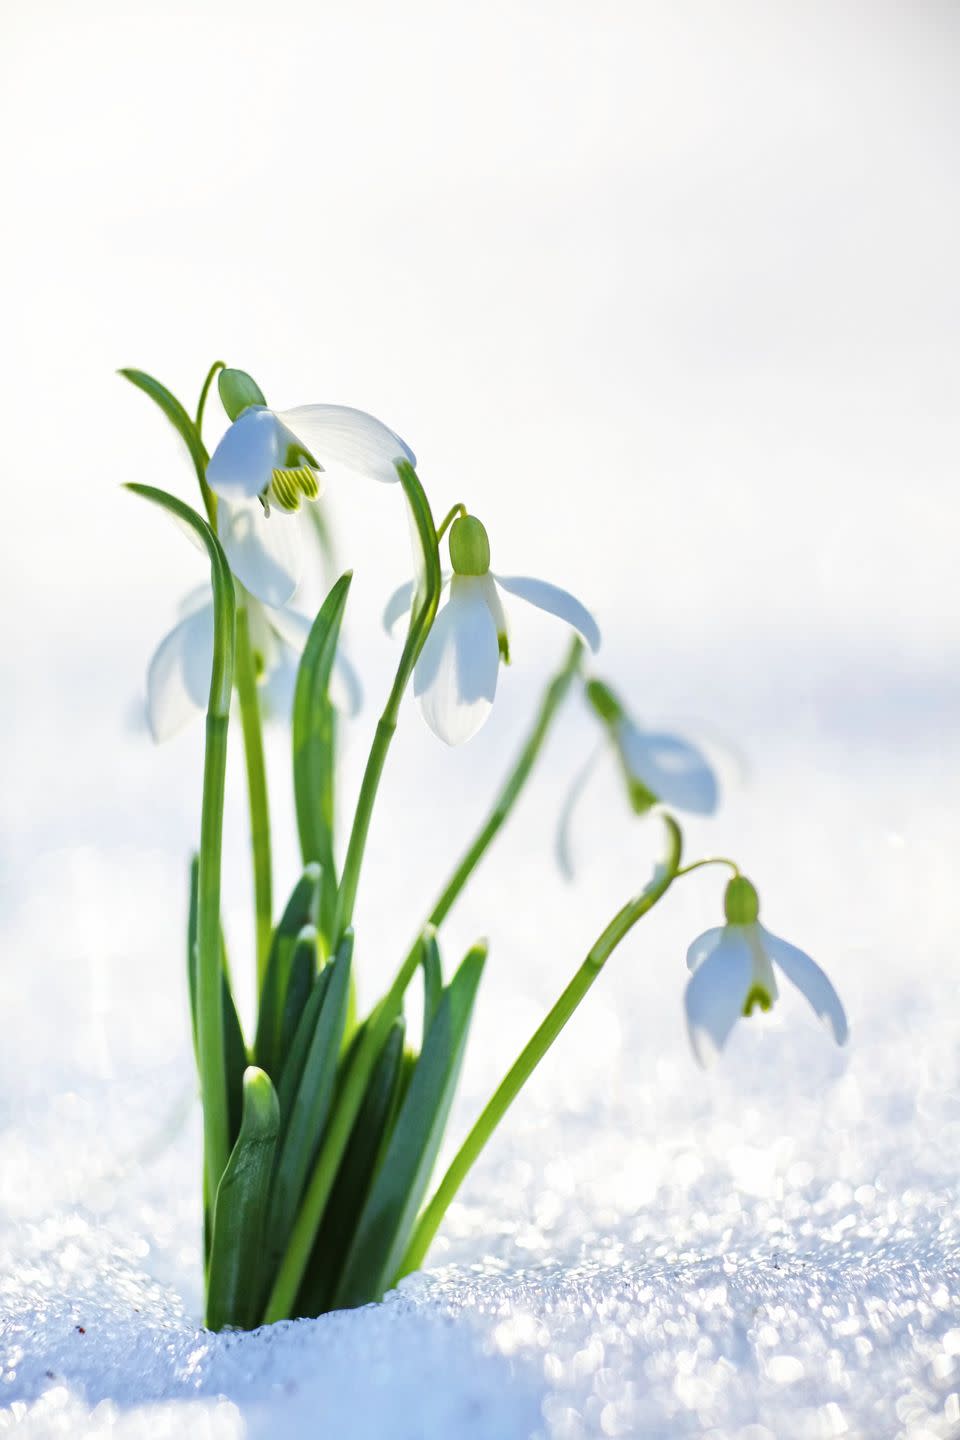 a close up of snowdrop flowers in snow